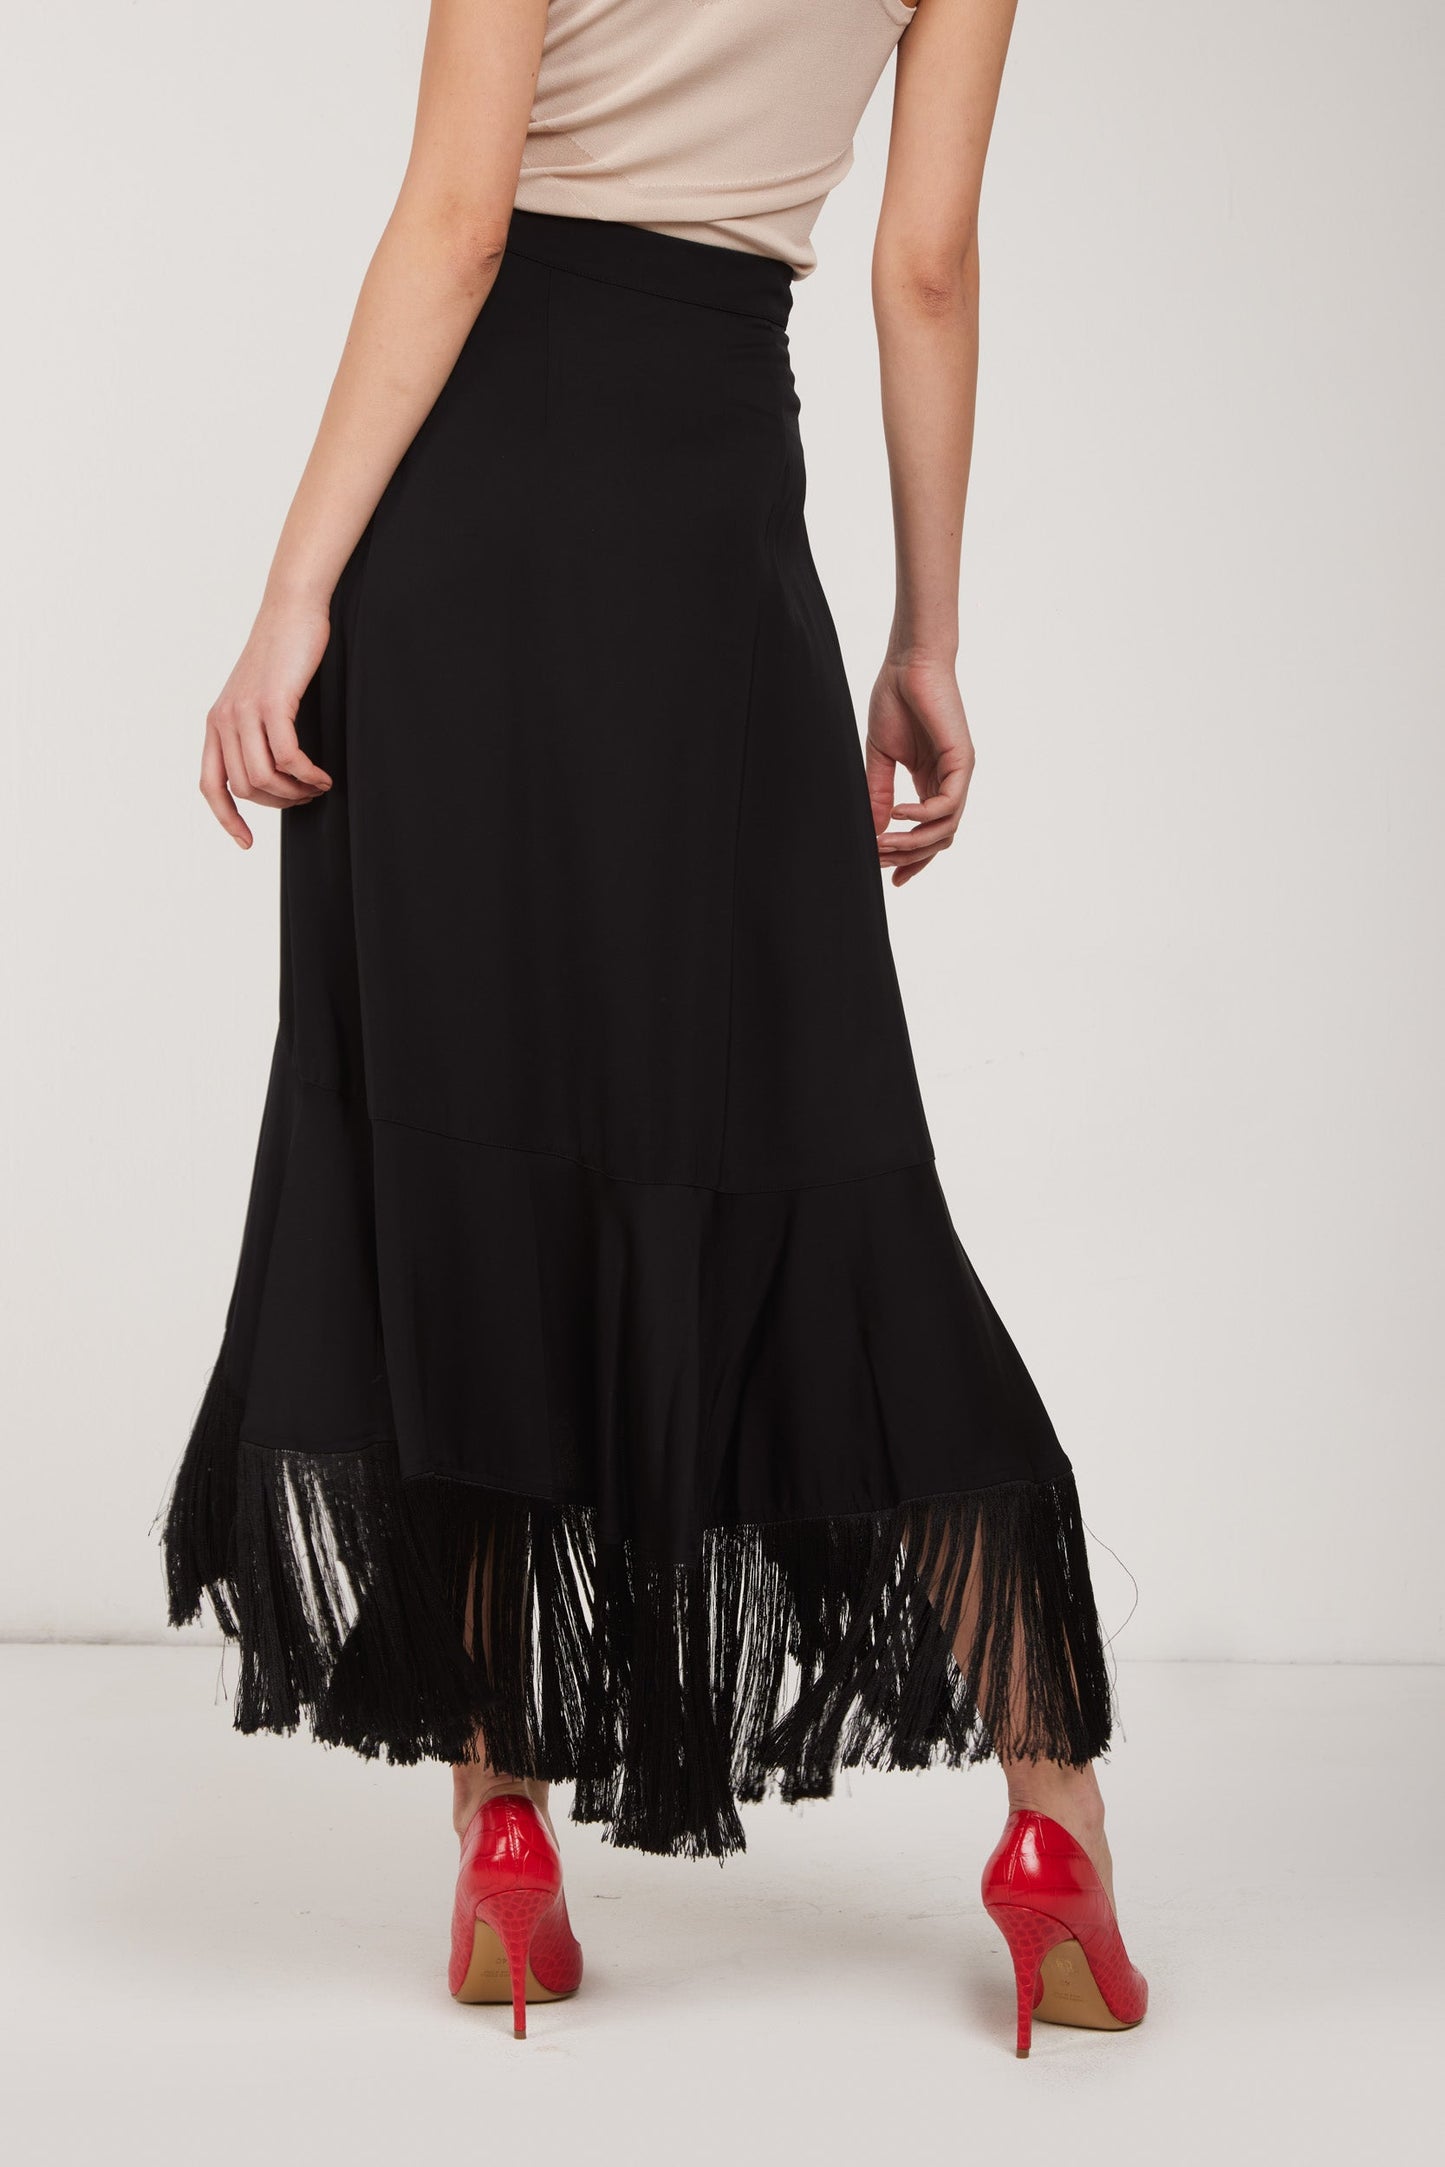 TWINSET Long Black Skirt and Fringes